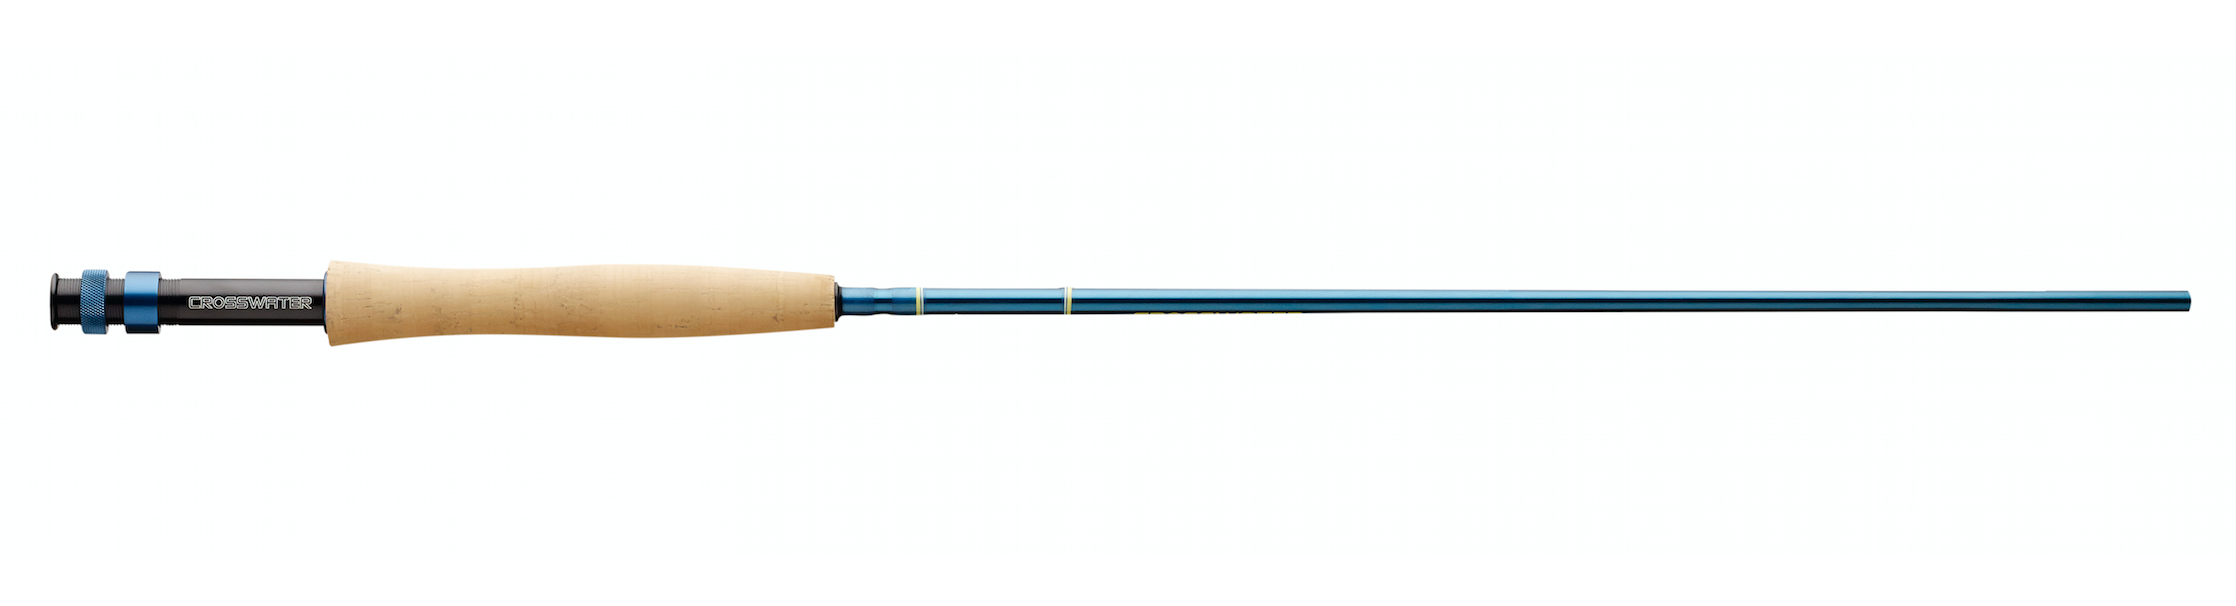 Redington Crosswater Fly Fishing Outfit (490-4) - 4 Weight, 9' Fly